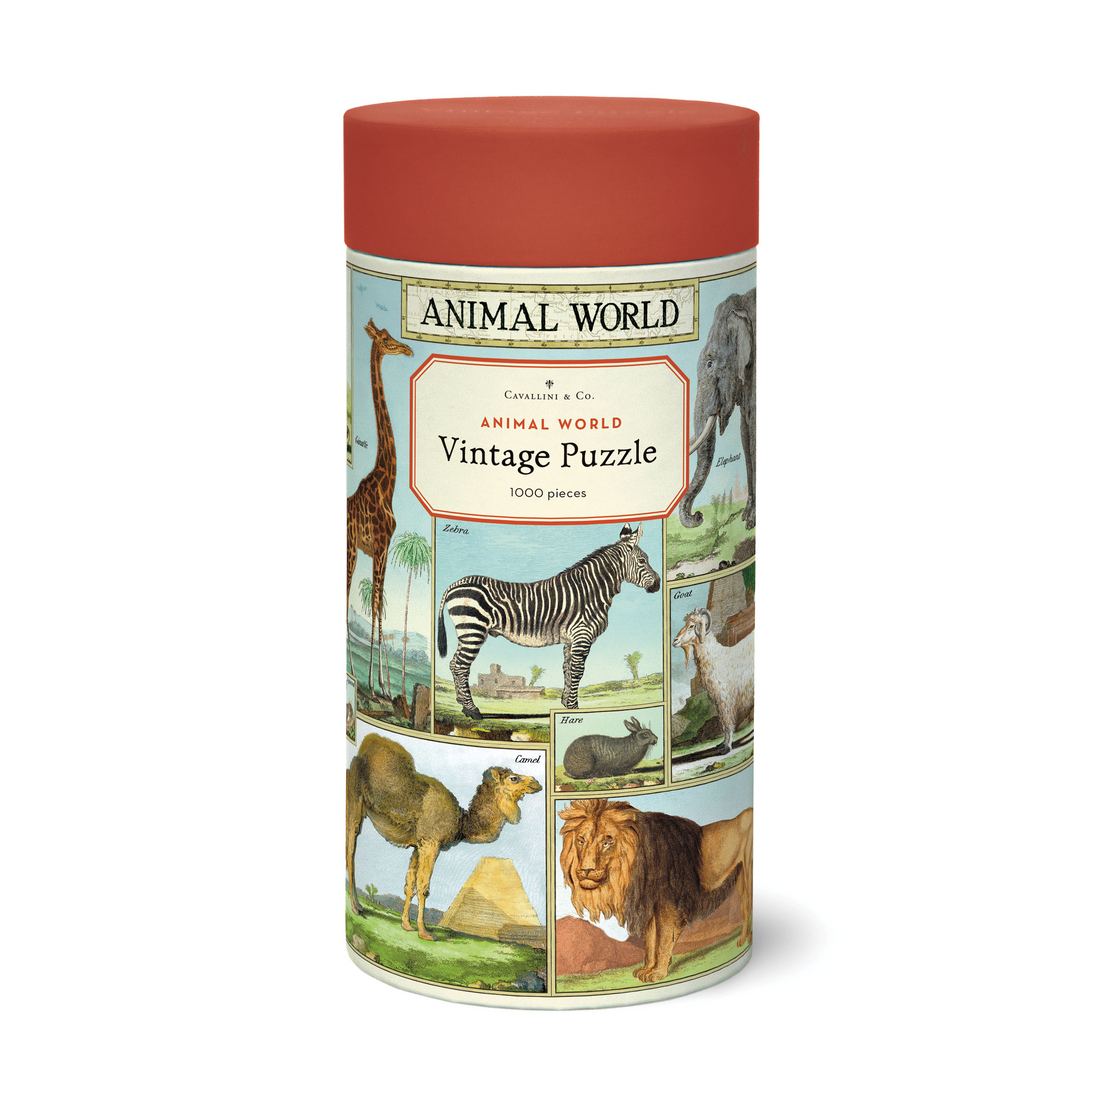 A cylindrical puzzle box with a vintage design, labeled &quot;Cavallini Papers &amp; Co Animal World Puzzle,&quot; featuring illustrated images of various animals.